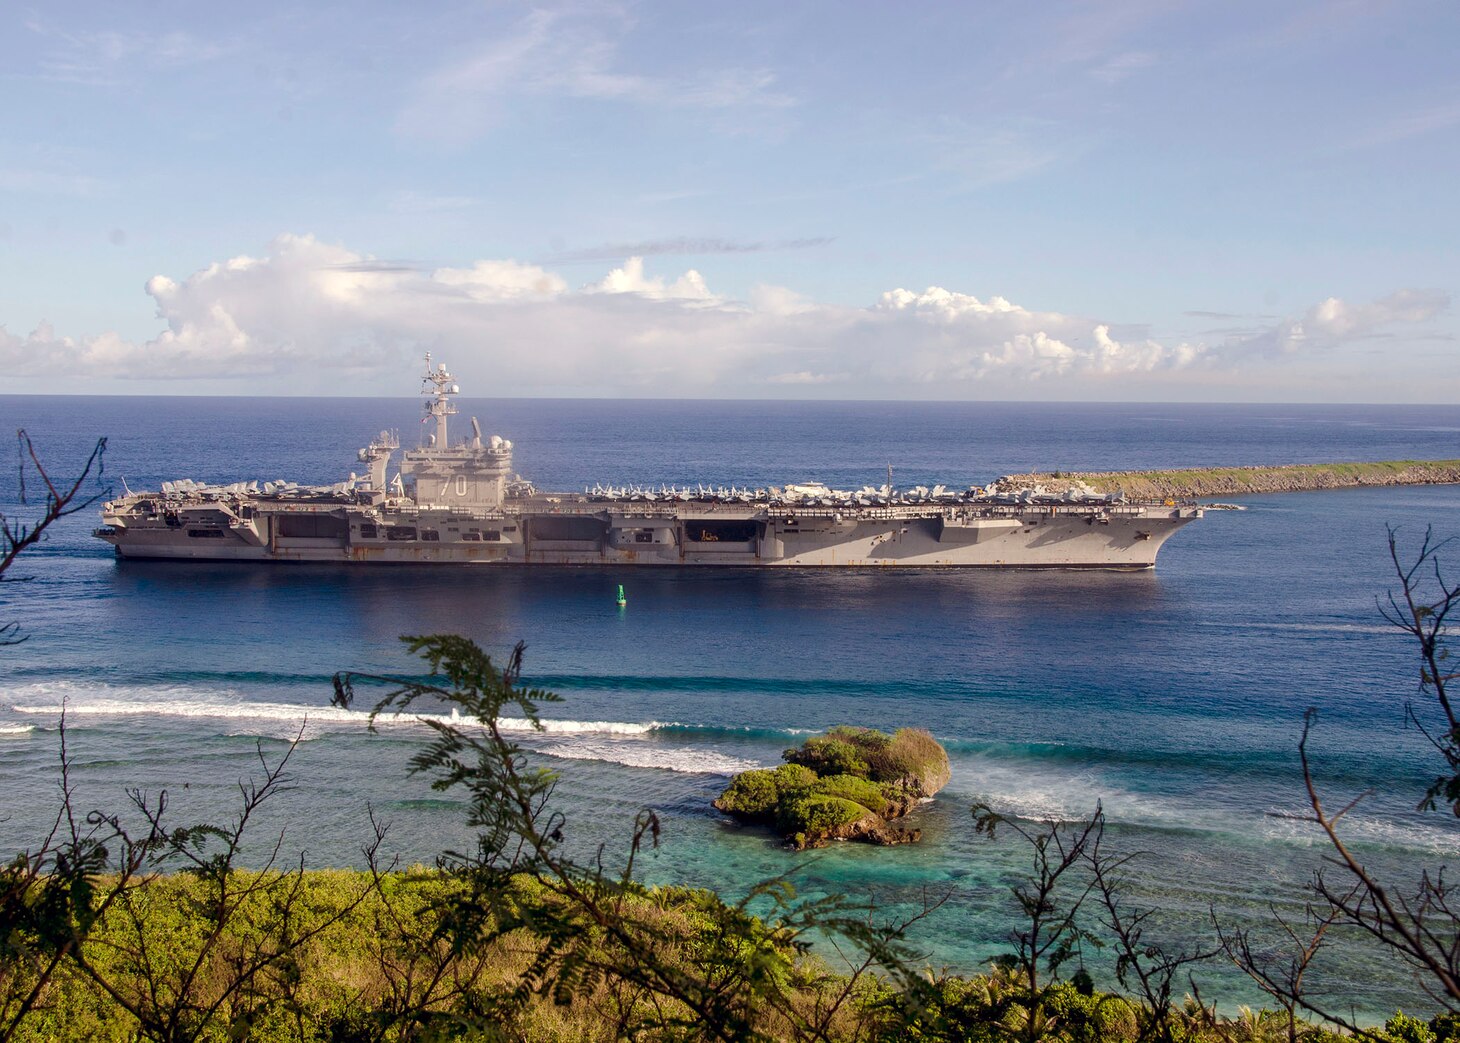 The Nimitz-class aircraft carrier USS Carl Vinson (CVN 70) pulls into Naval Base Guam,  Feb. 10. Vinson is on a regularly scheduled Western Pacific deployment with the Carl Vinson Carrier Strike Group as part of the U.S. Pacific Fleet-led initiative to extend the command and control functions of the U.S. 3rd Fleet in the Indo-Asia-Pacific region. Navy aircraft carrier strike groups have patrolled the Indo-Asia-Pacific regularly and routinely for more than 70 years. 
